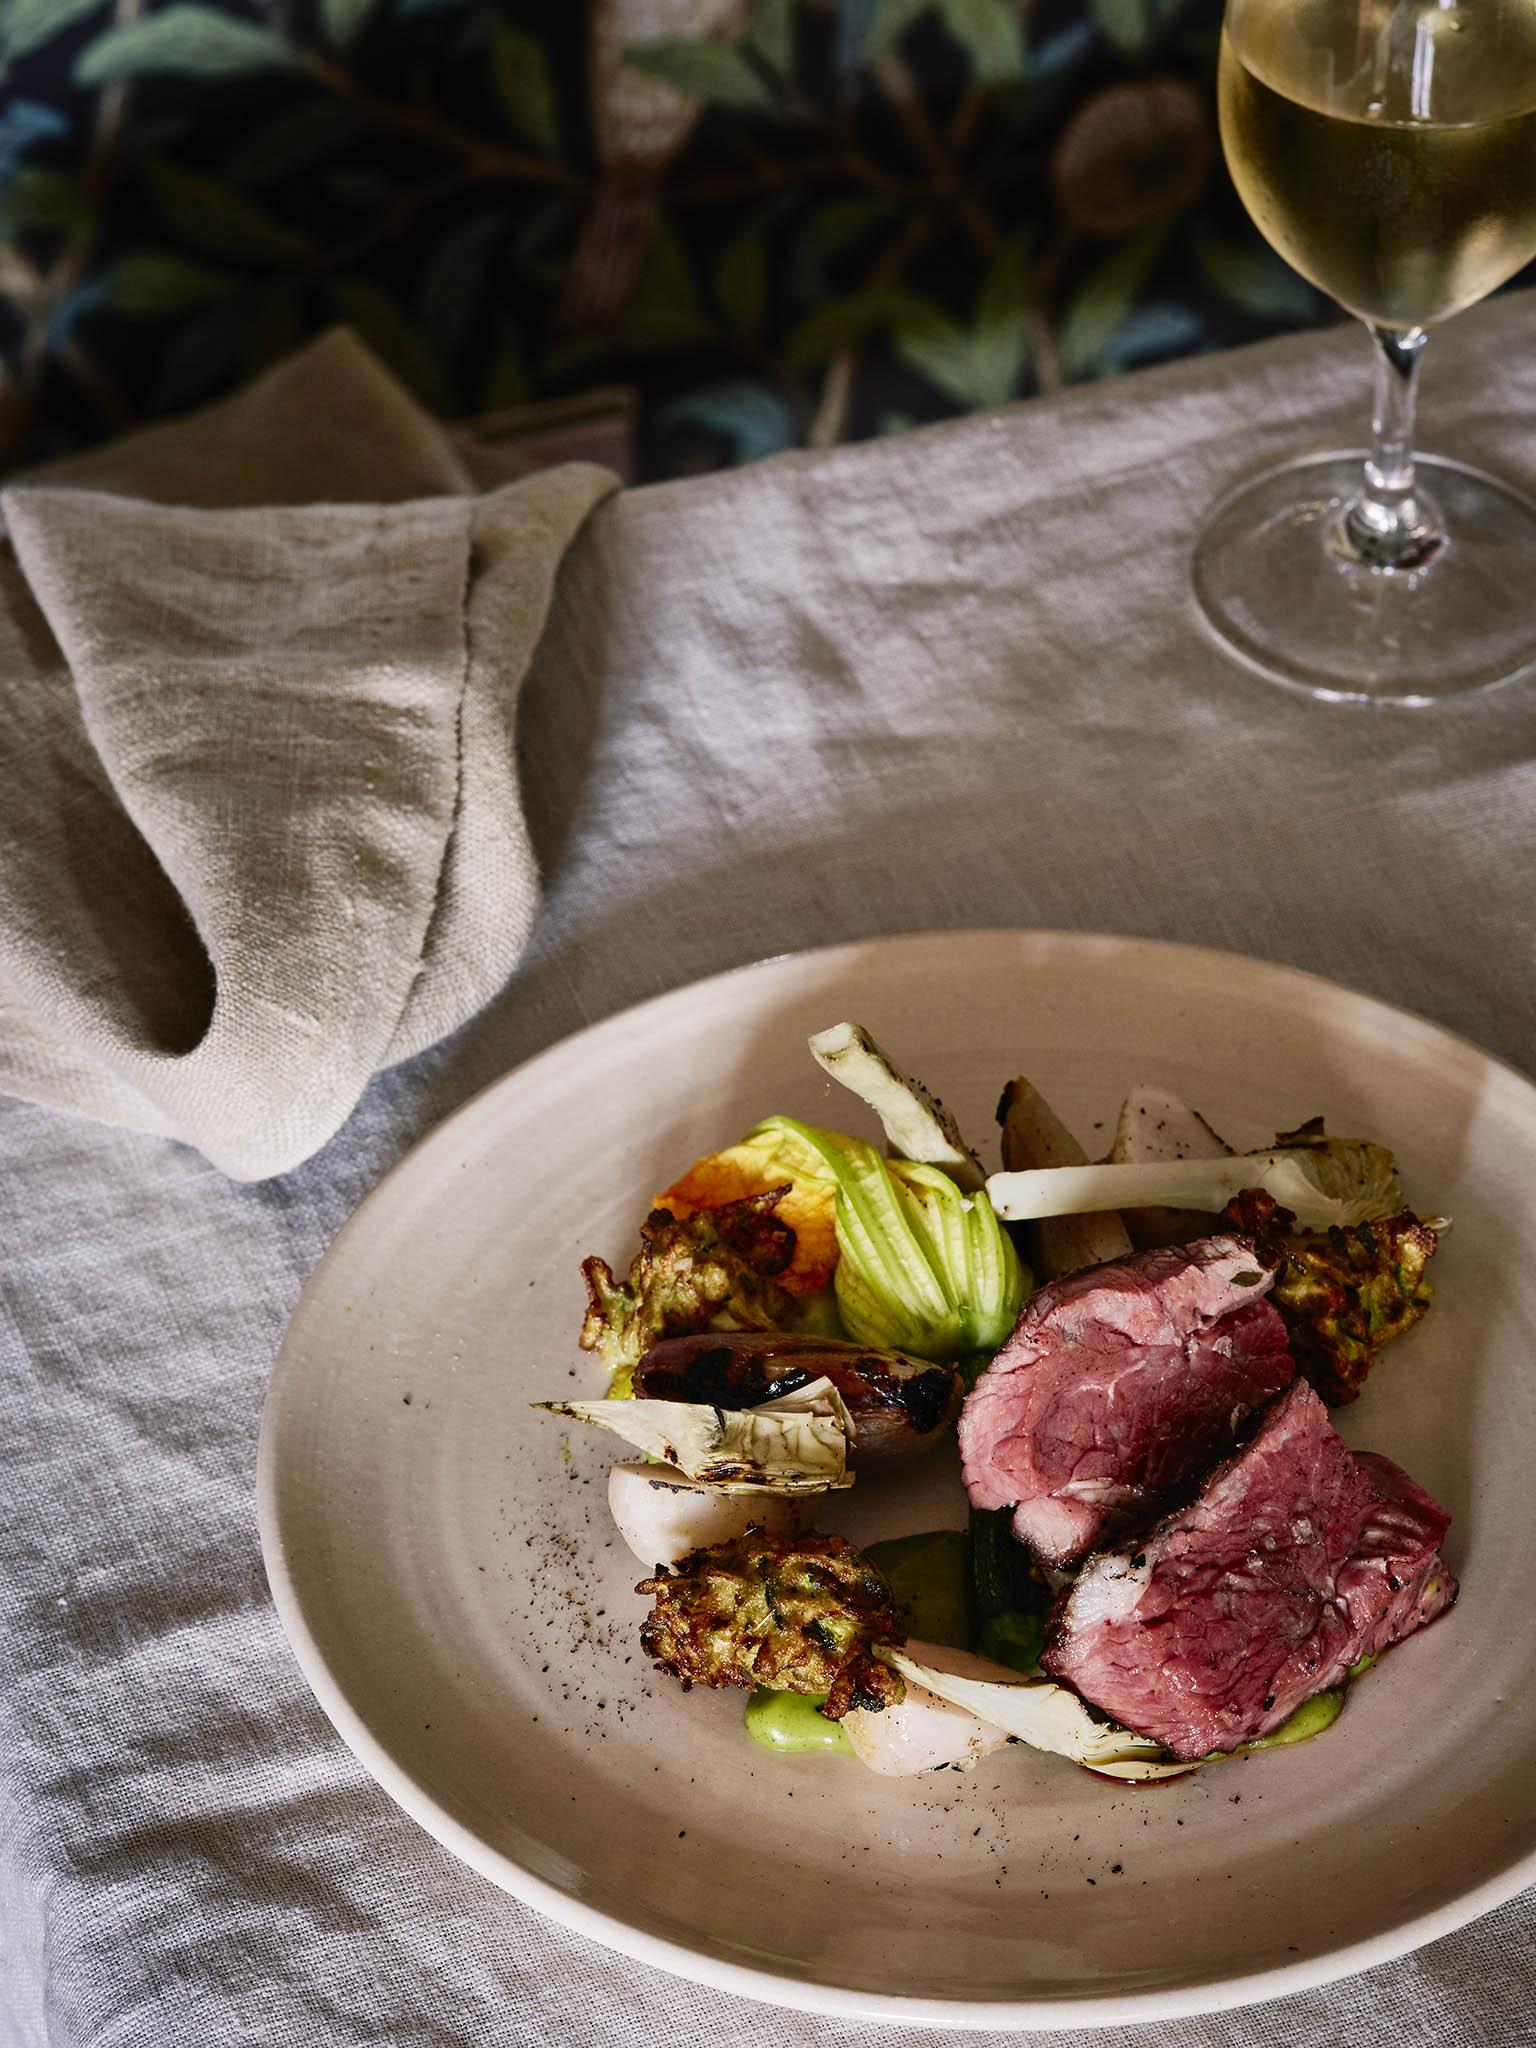 A sprinkle of pepper: the South Leigh lamb and courgette is beaut